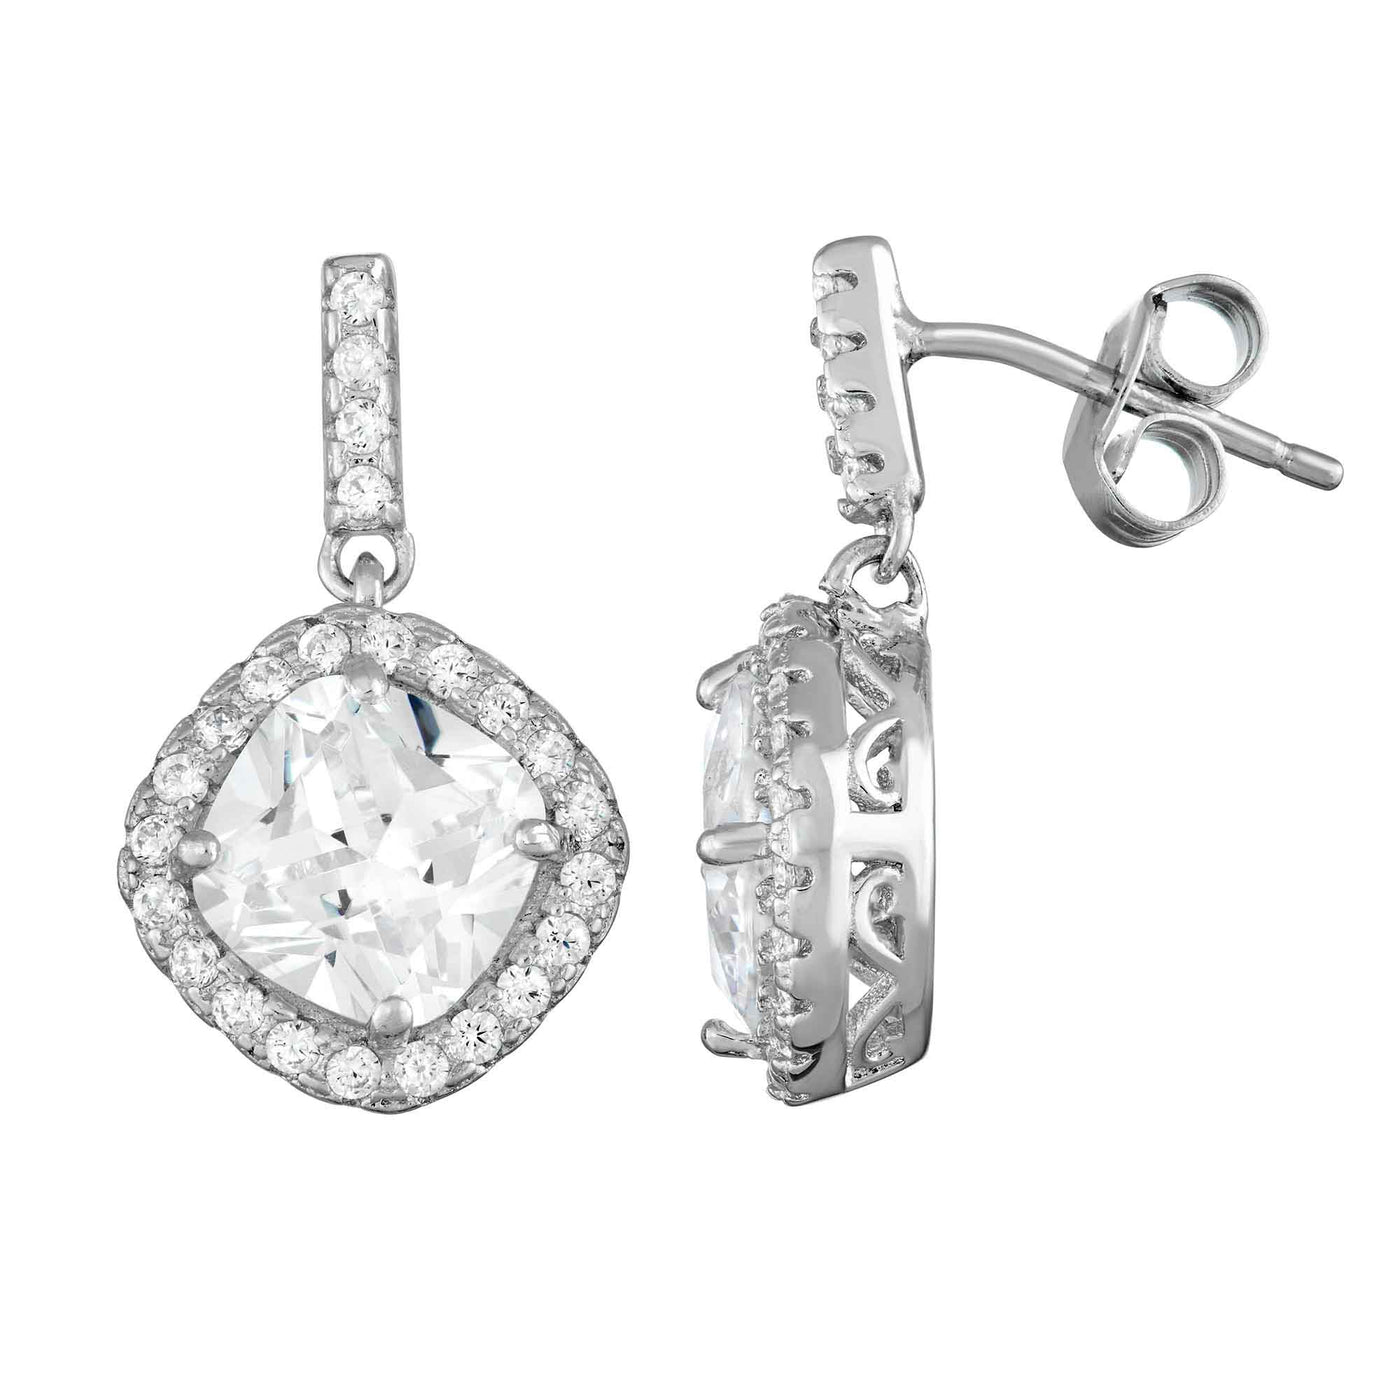 Rebecca Sloane Silver Cushion Earrings With Faceted White CZ